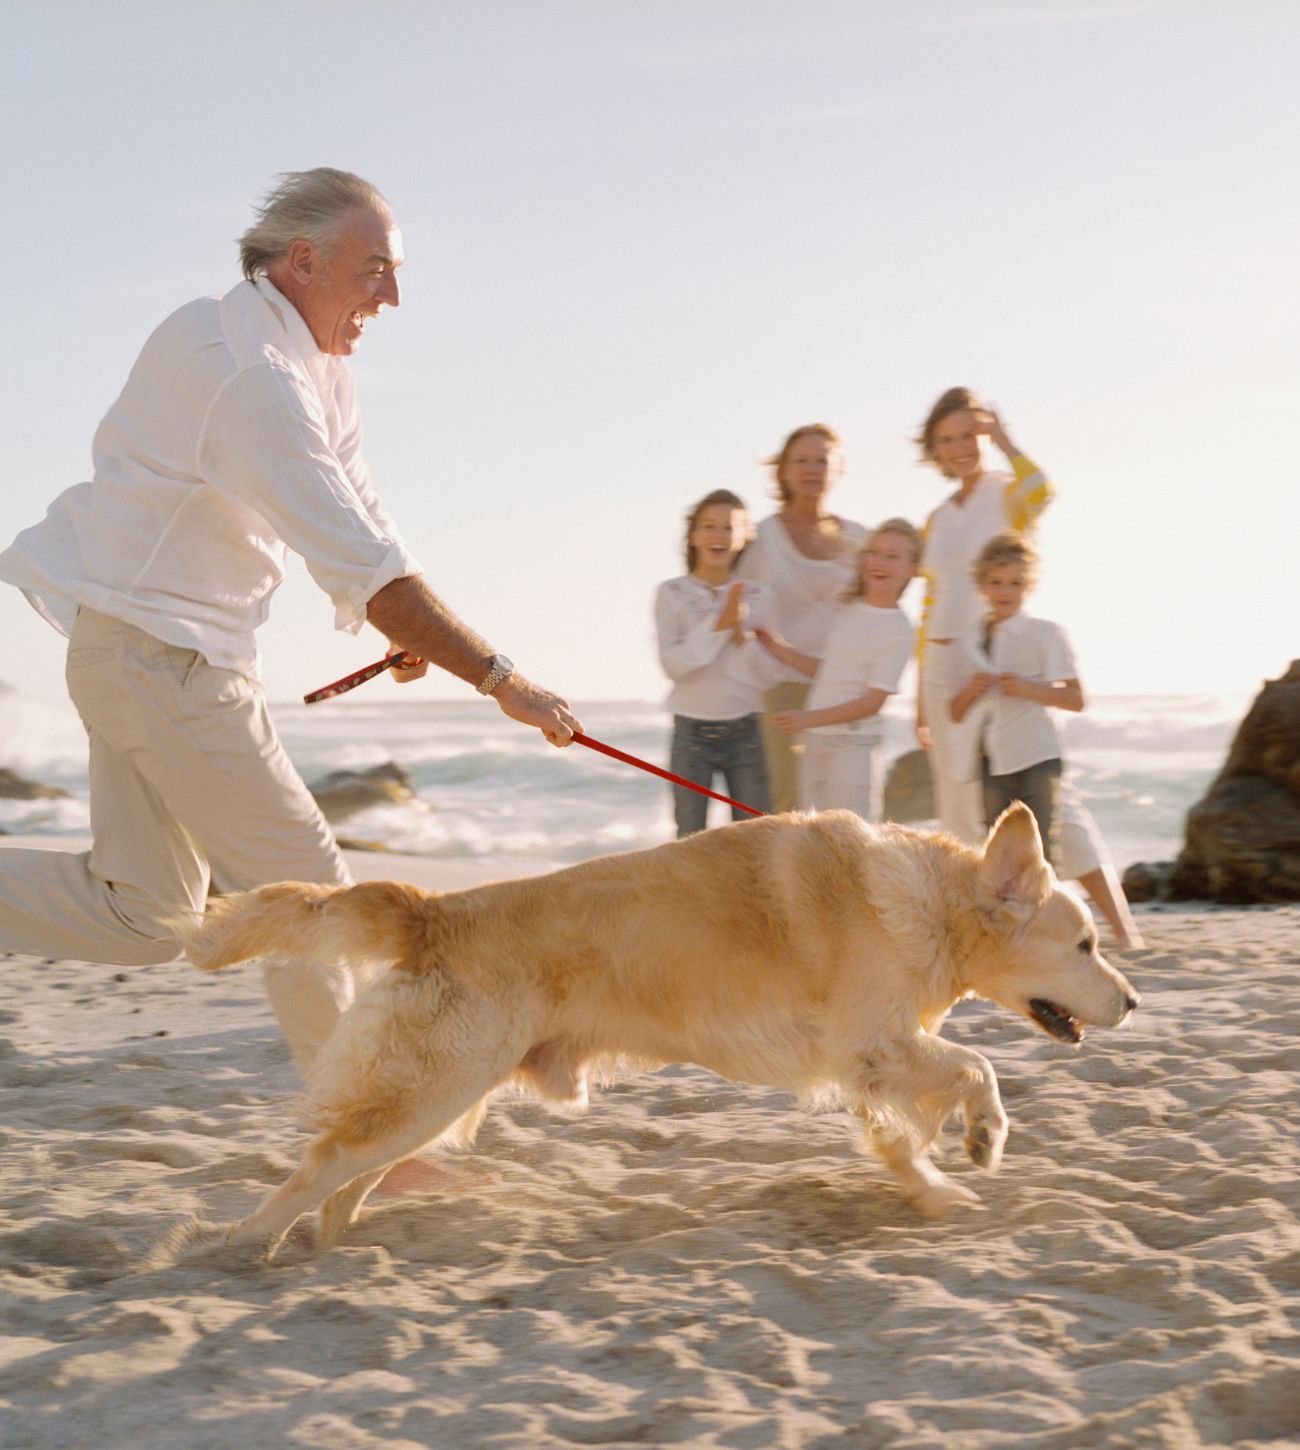 Photo of a multigenerational family enjoying time on the beach as the granddad runs past with the family pup.